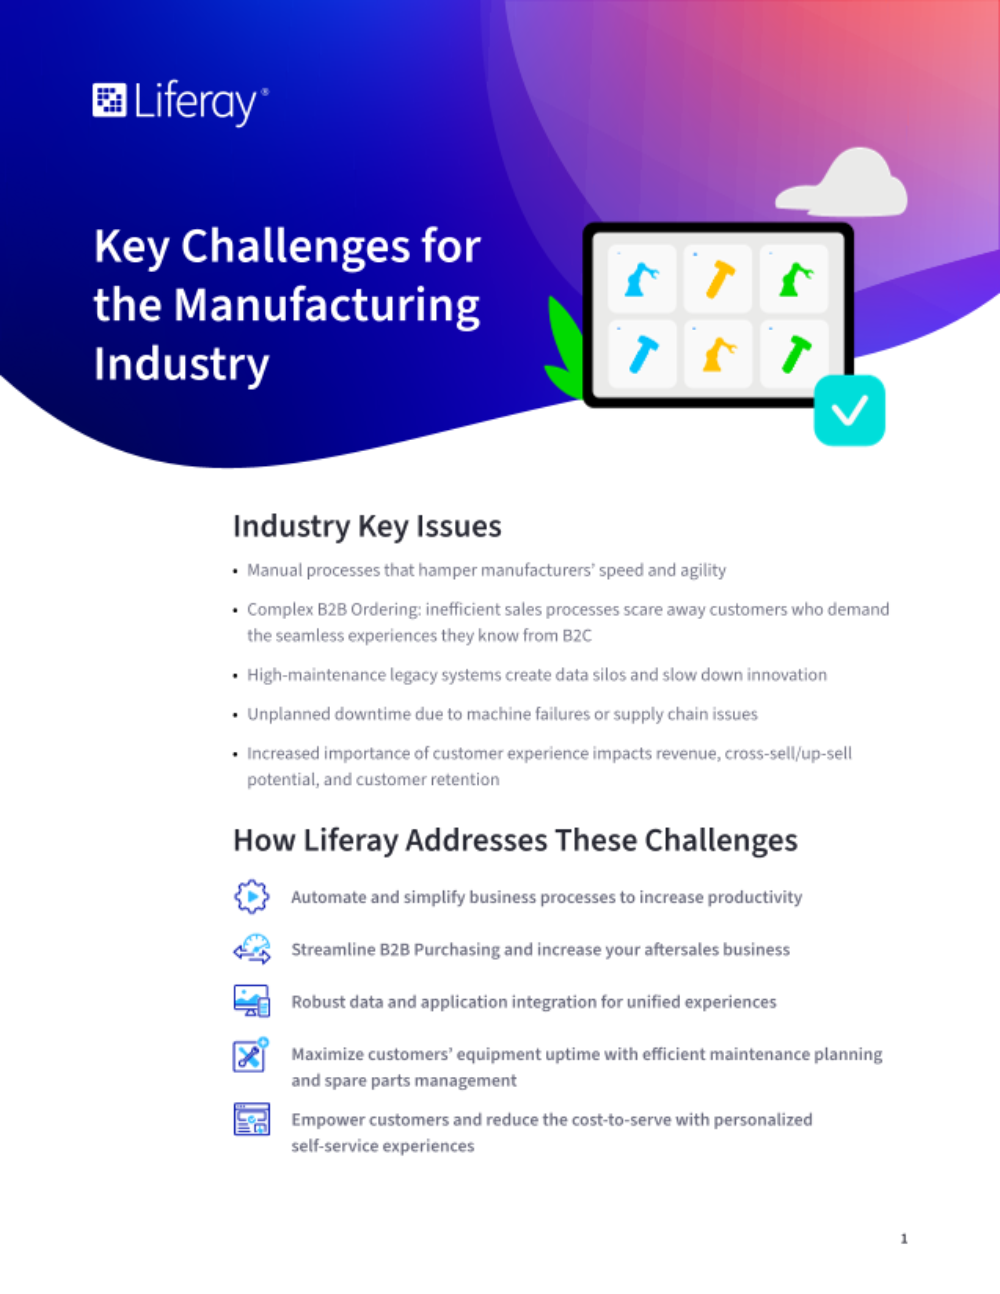 Key Challenges for the Manufacturing Industry – and How Liferay Addresses Them